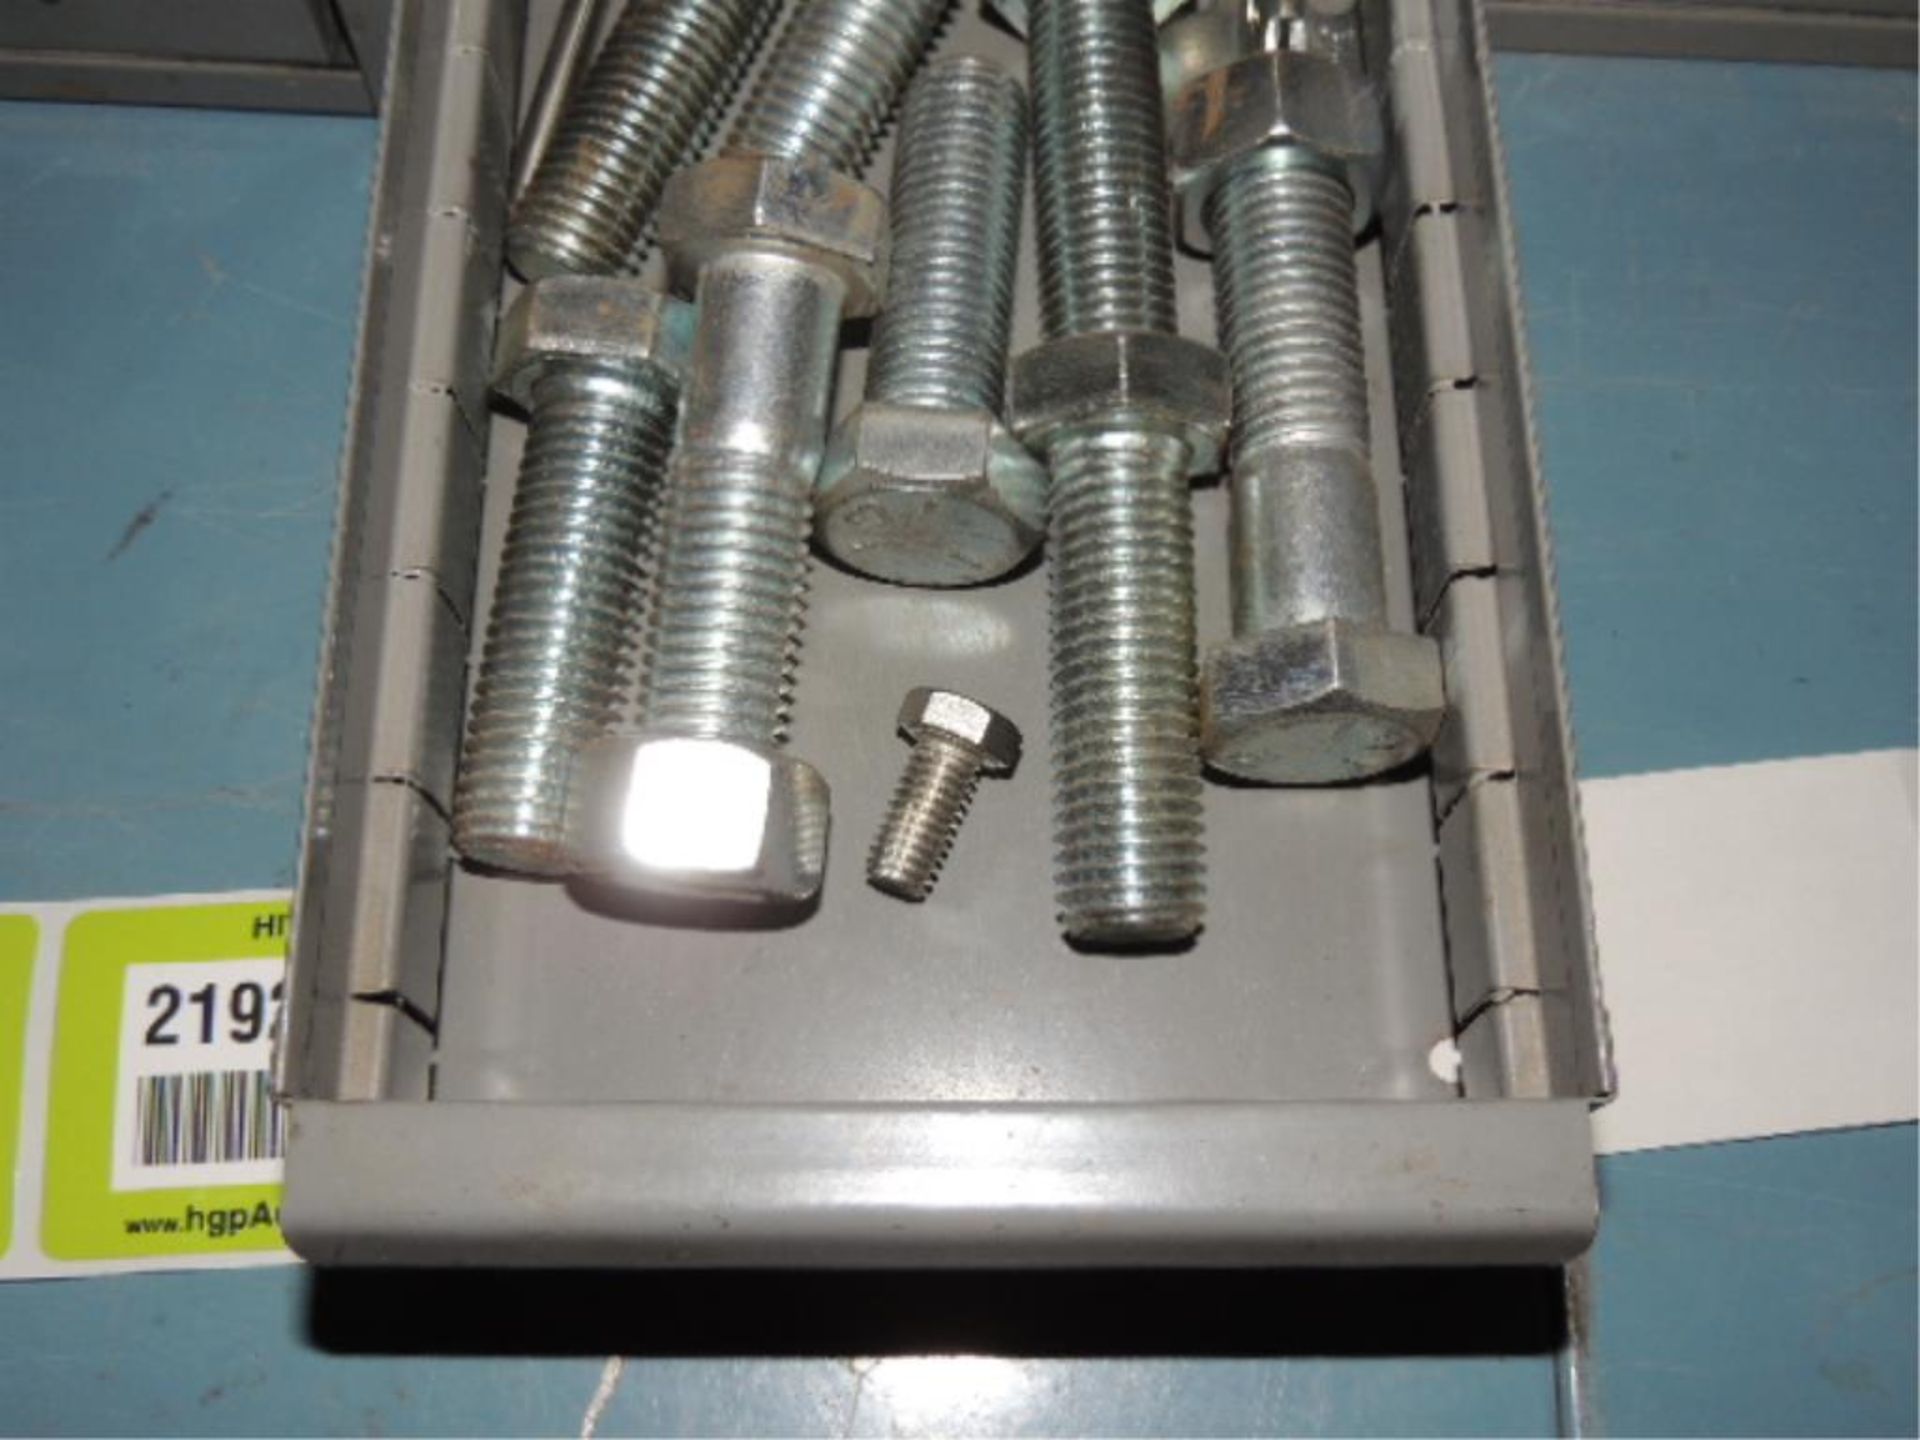 Bins; Lot: (8)parts bins w/ 18 bins each and contents, rivets, nuts, bolts, wing nuts, nipples, - Image 12 of 14